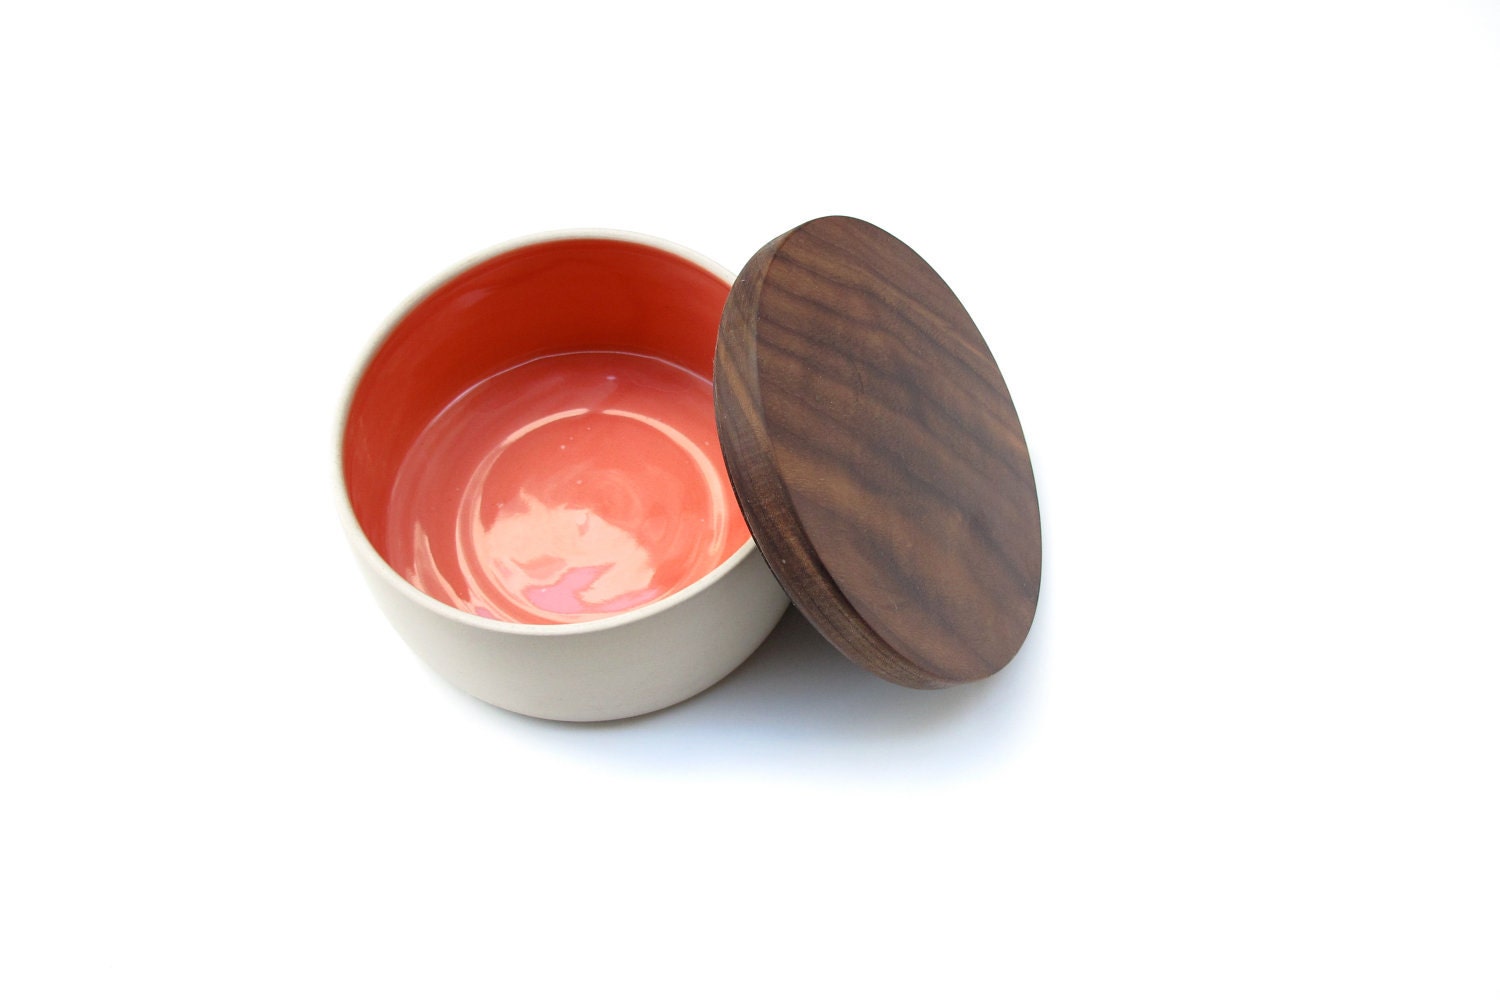 The Pink wood lidded Bowl